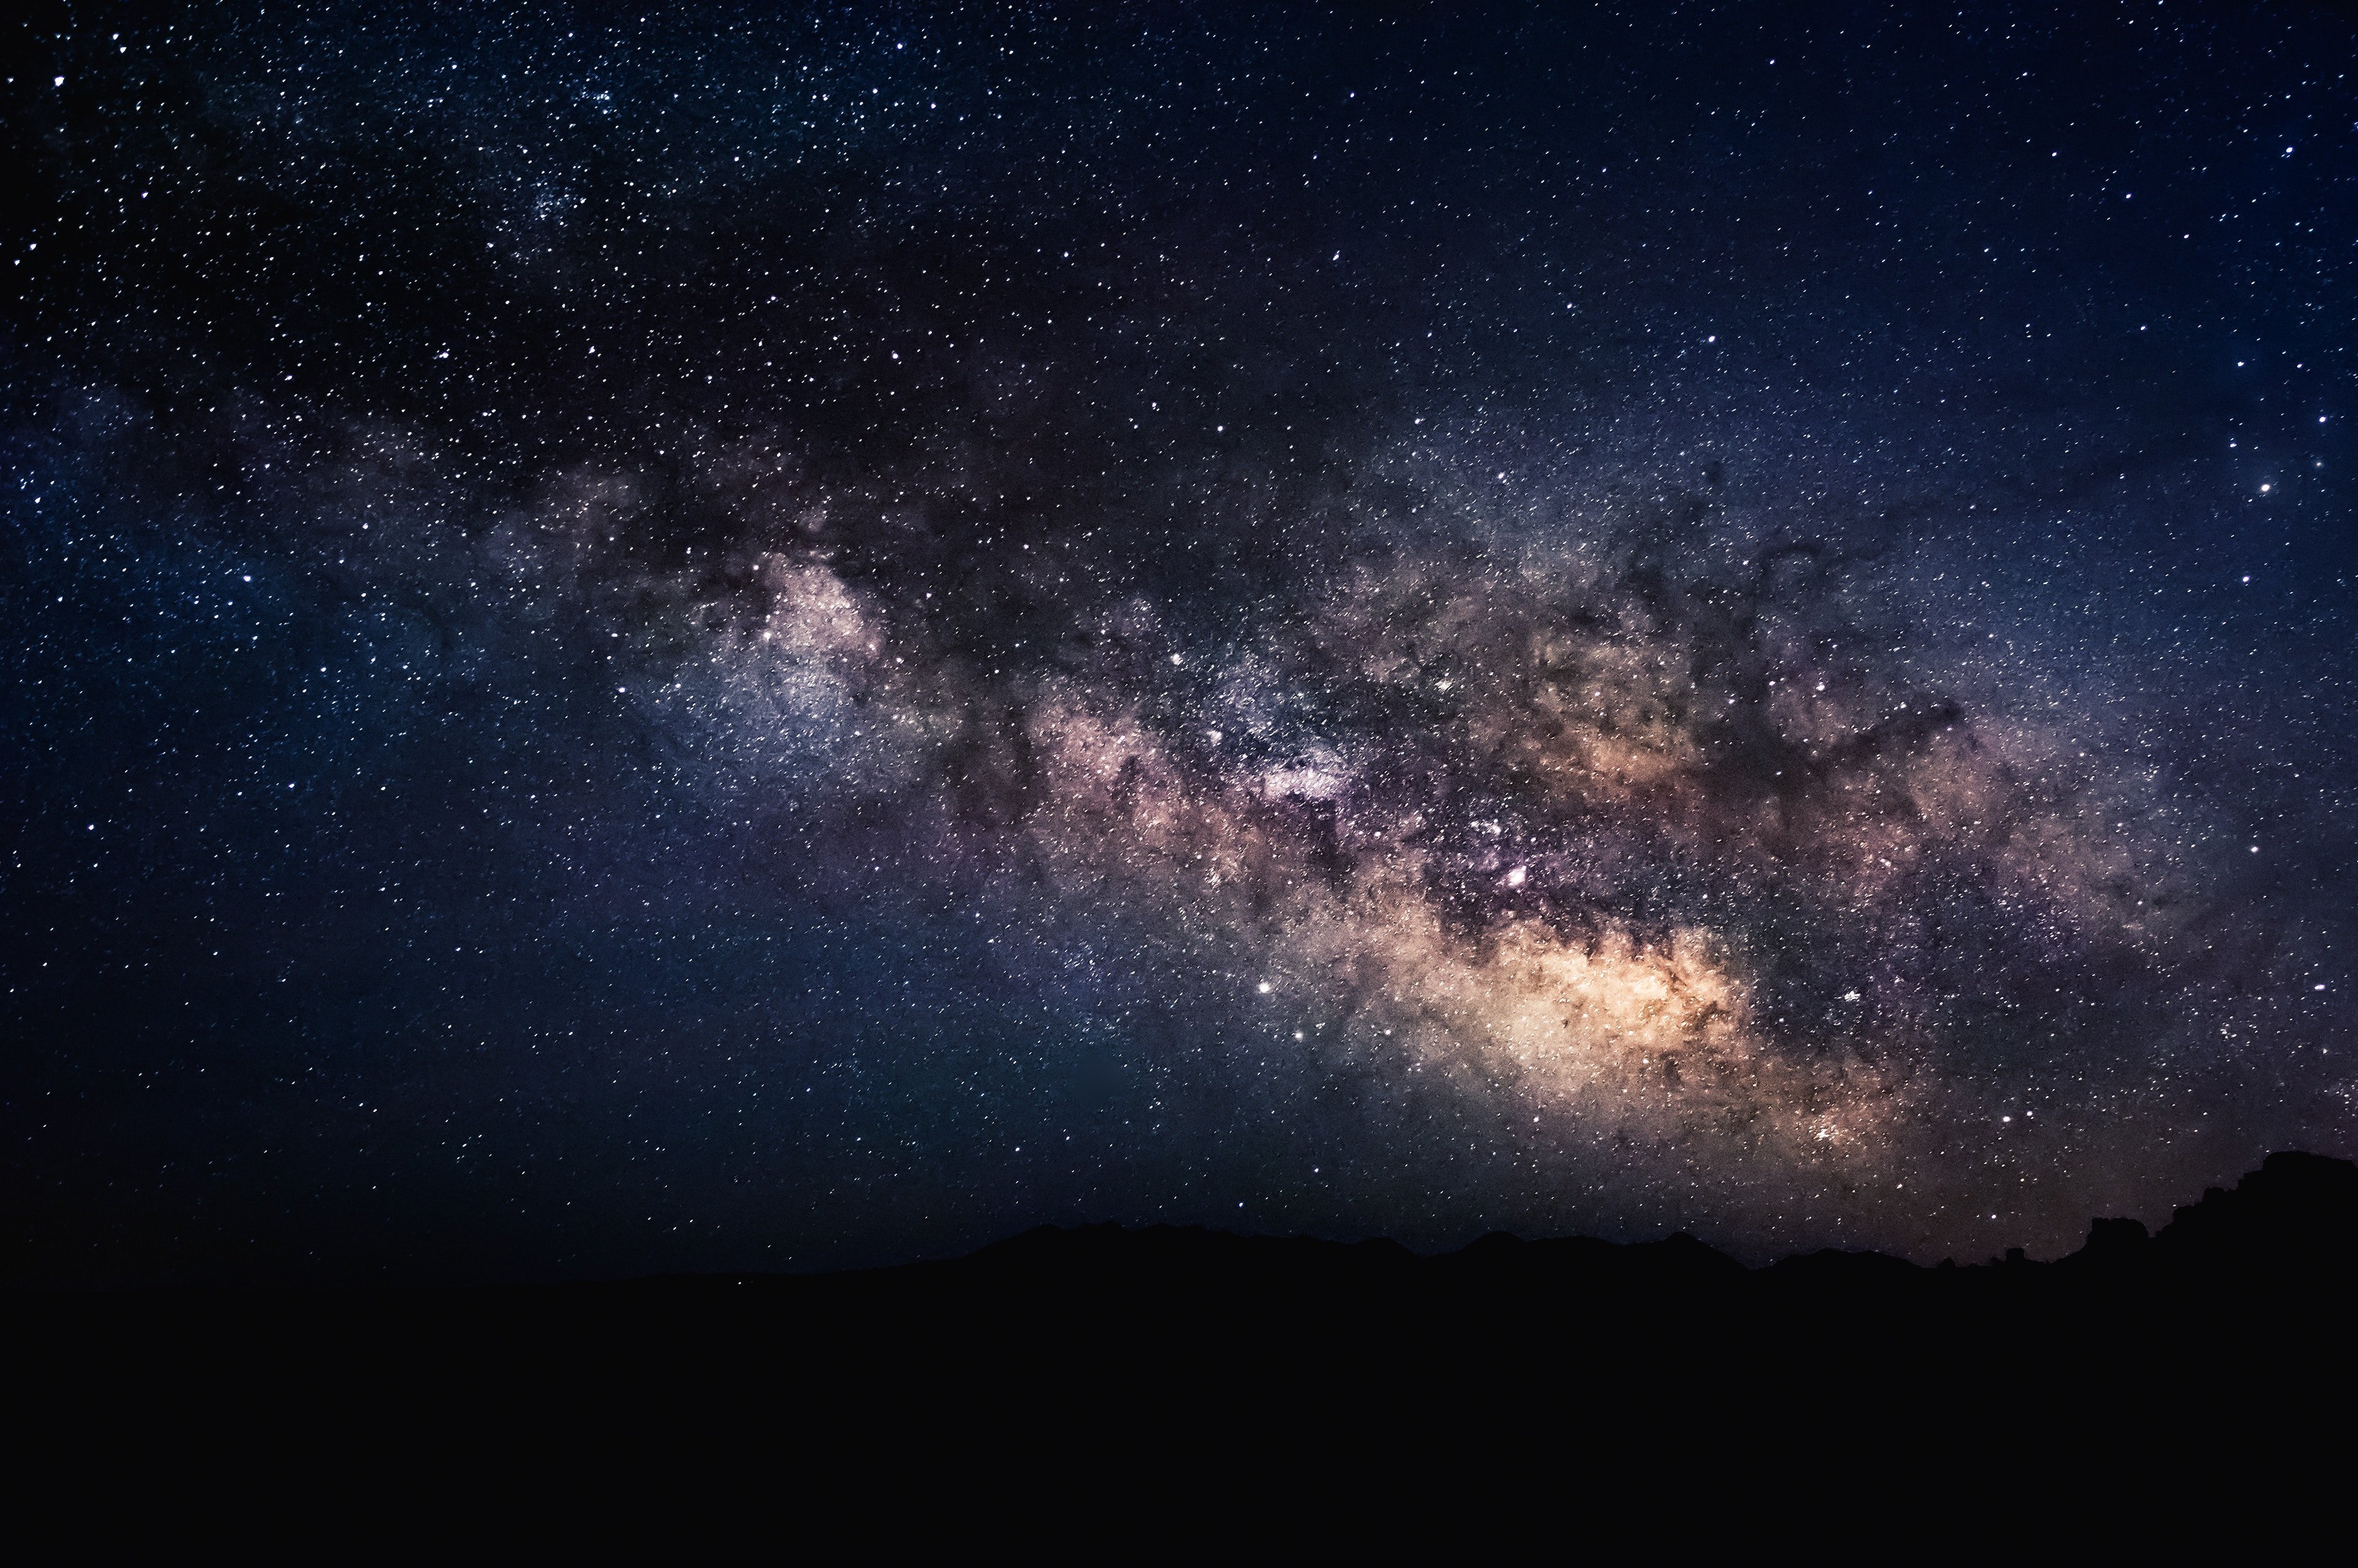 3687x2452 wallpaper, HD wallpaper, nature, nebula, tumblr background, universe, background, space, astrophotography, outdoors, astronomy, HD wallpaper, milky way, night, computer background, HD background, outer space, sky, HD bac. Mocah